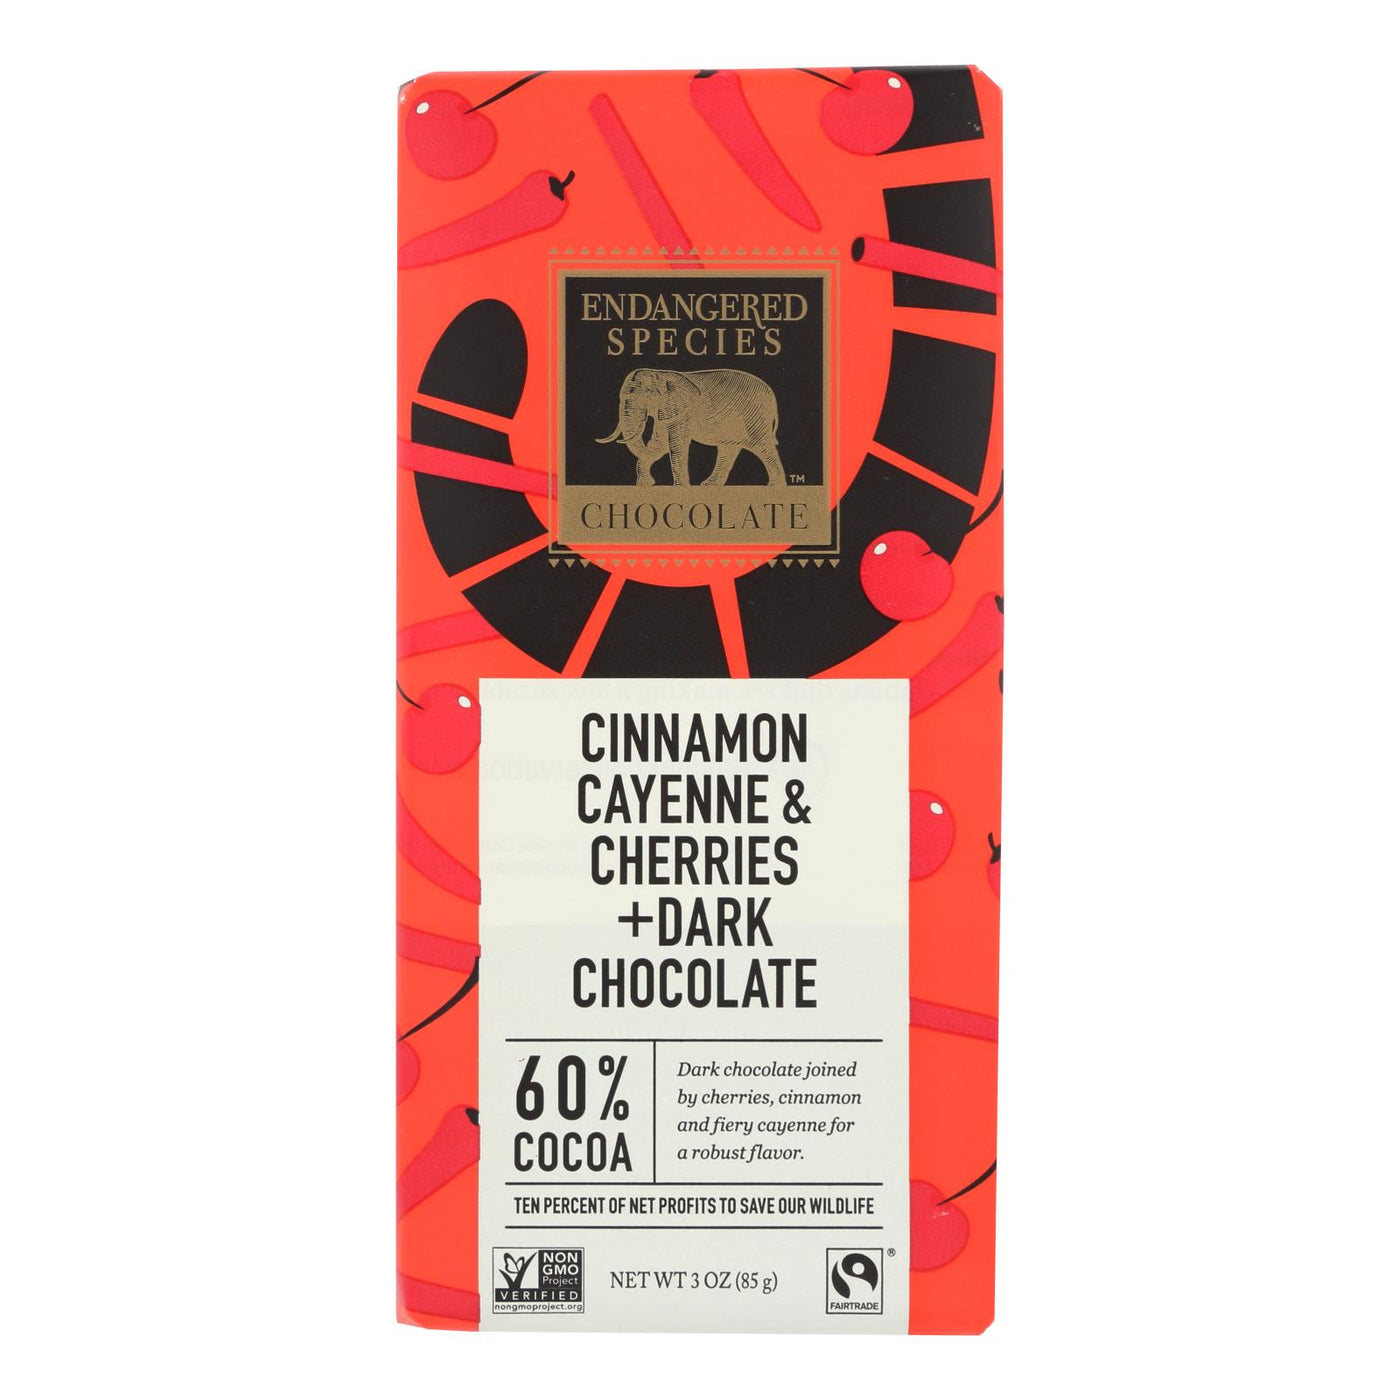 Endangered Species Natural Chocolate Bars - Dark Chocolate - 60 Percent Cocoa - Cinnamon Cayenne And Cherries - 3 Oz Bars - Case Of 12 | OnlyNaturals.us